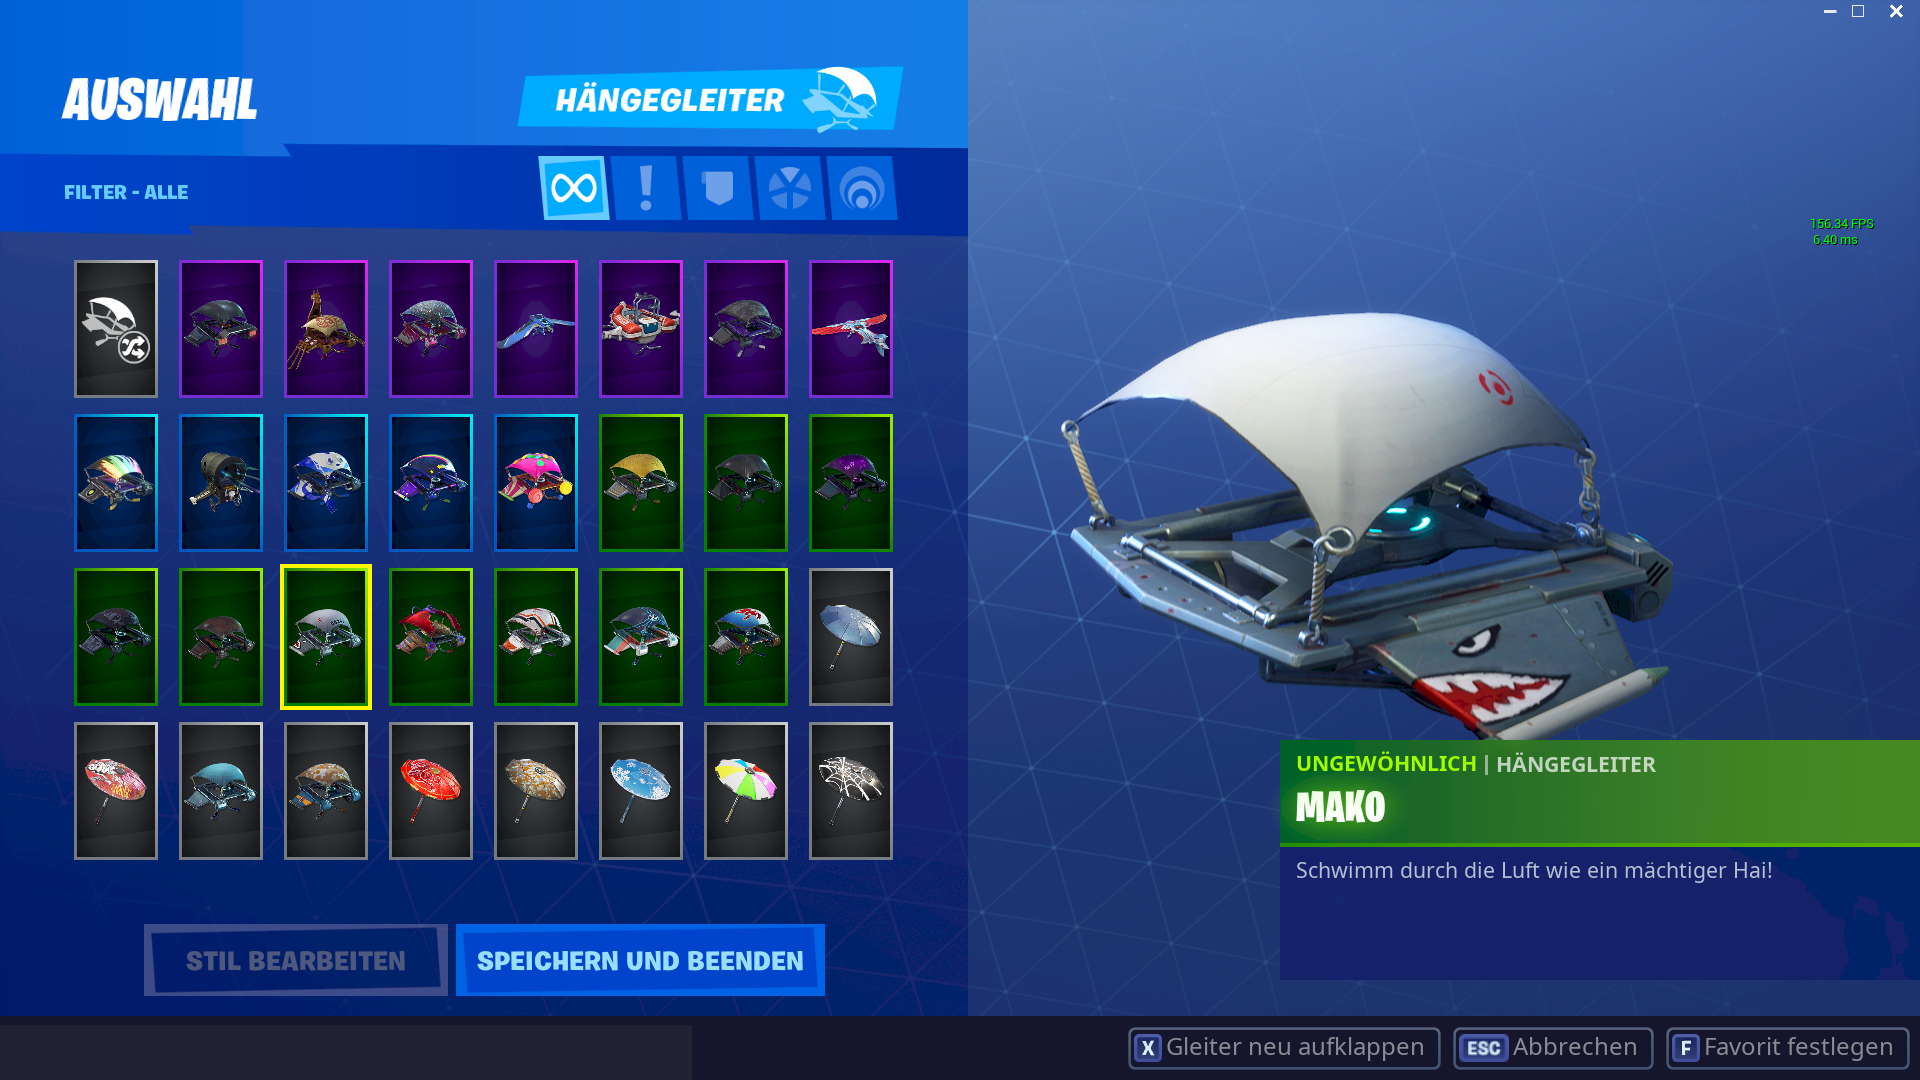 Does my fortnite account worth If yes, how much please in Euro - 5